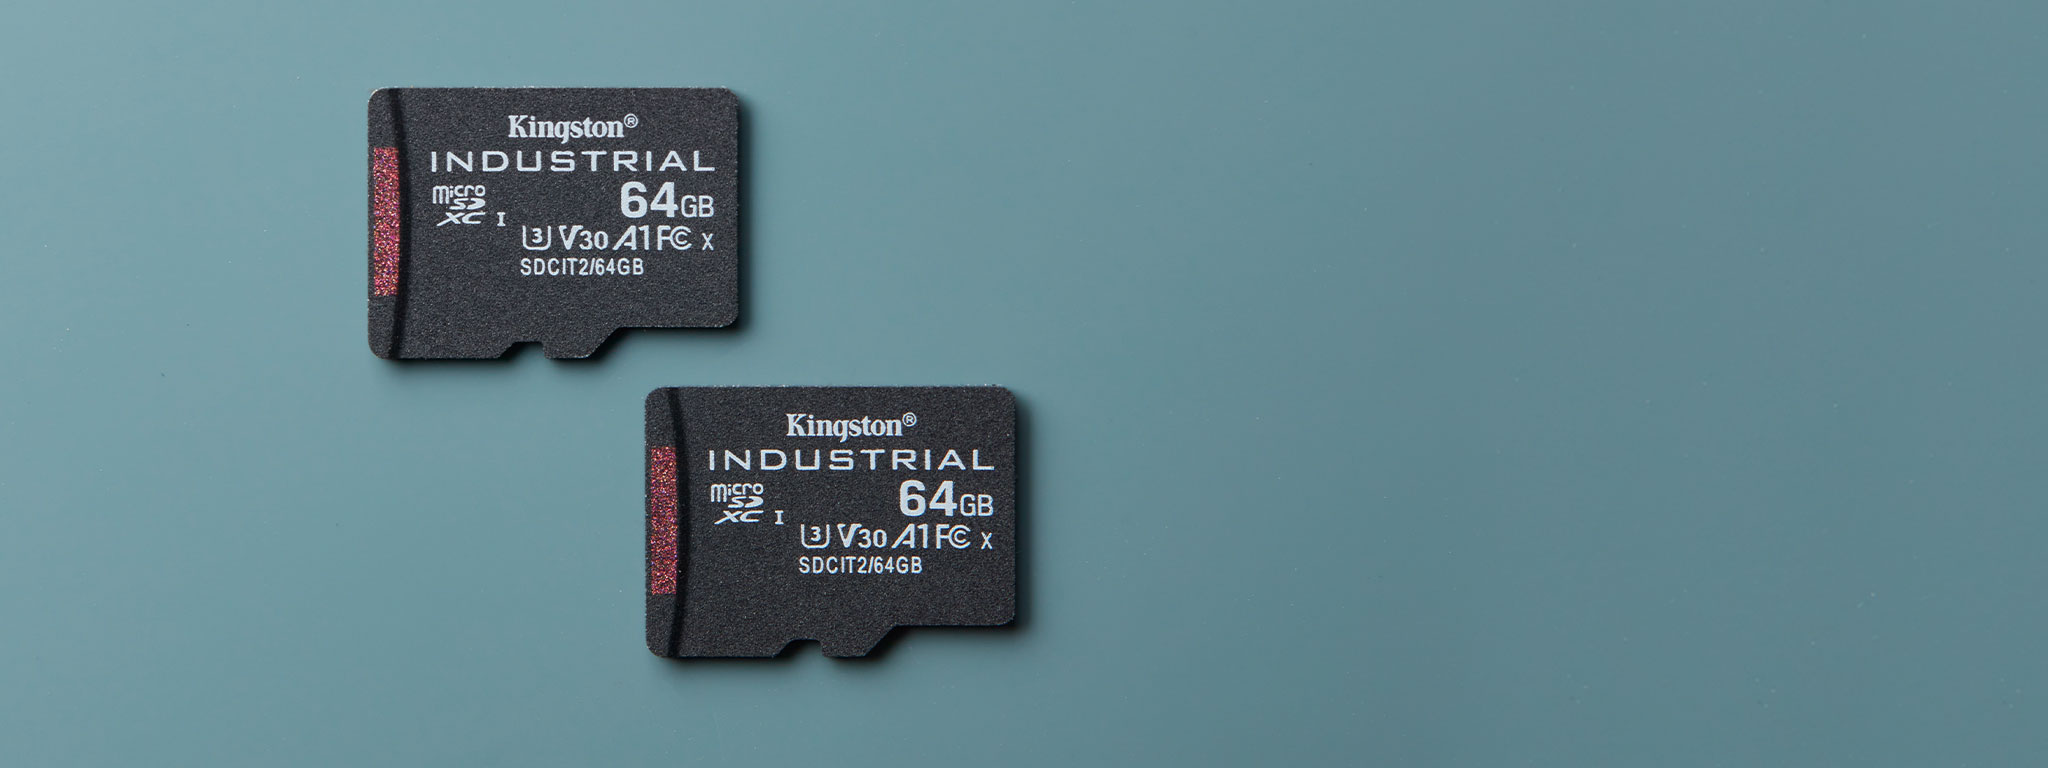 90MBs Works for Kingston Kingston Industrial Grade 8GB BLU Energy X LTE MicroSDHC Card Verified by SanFlash.